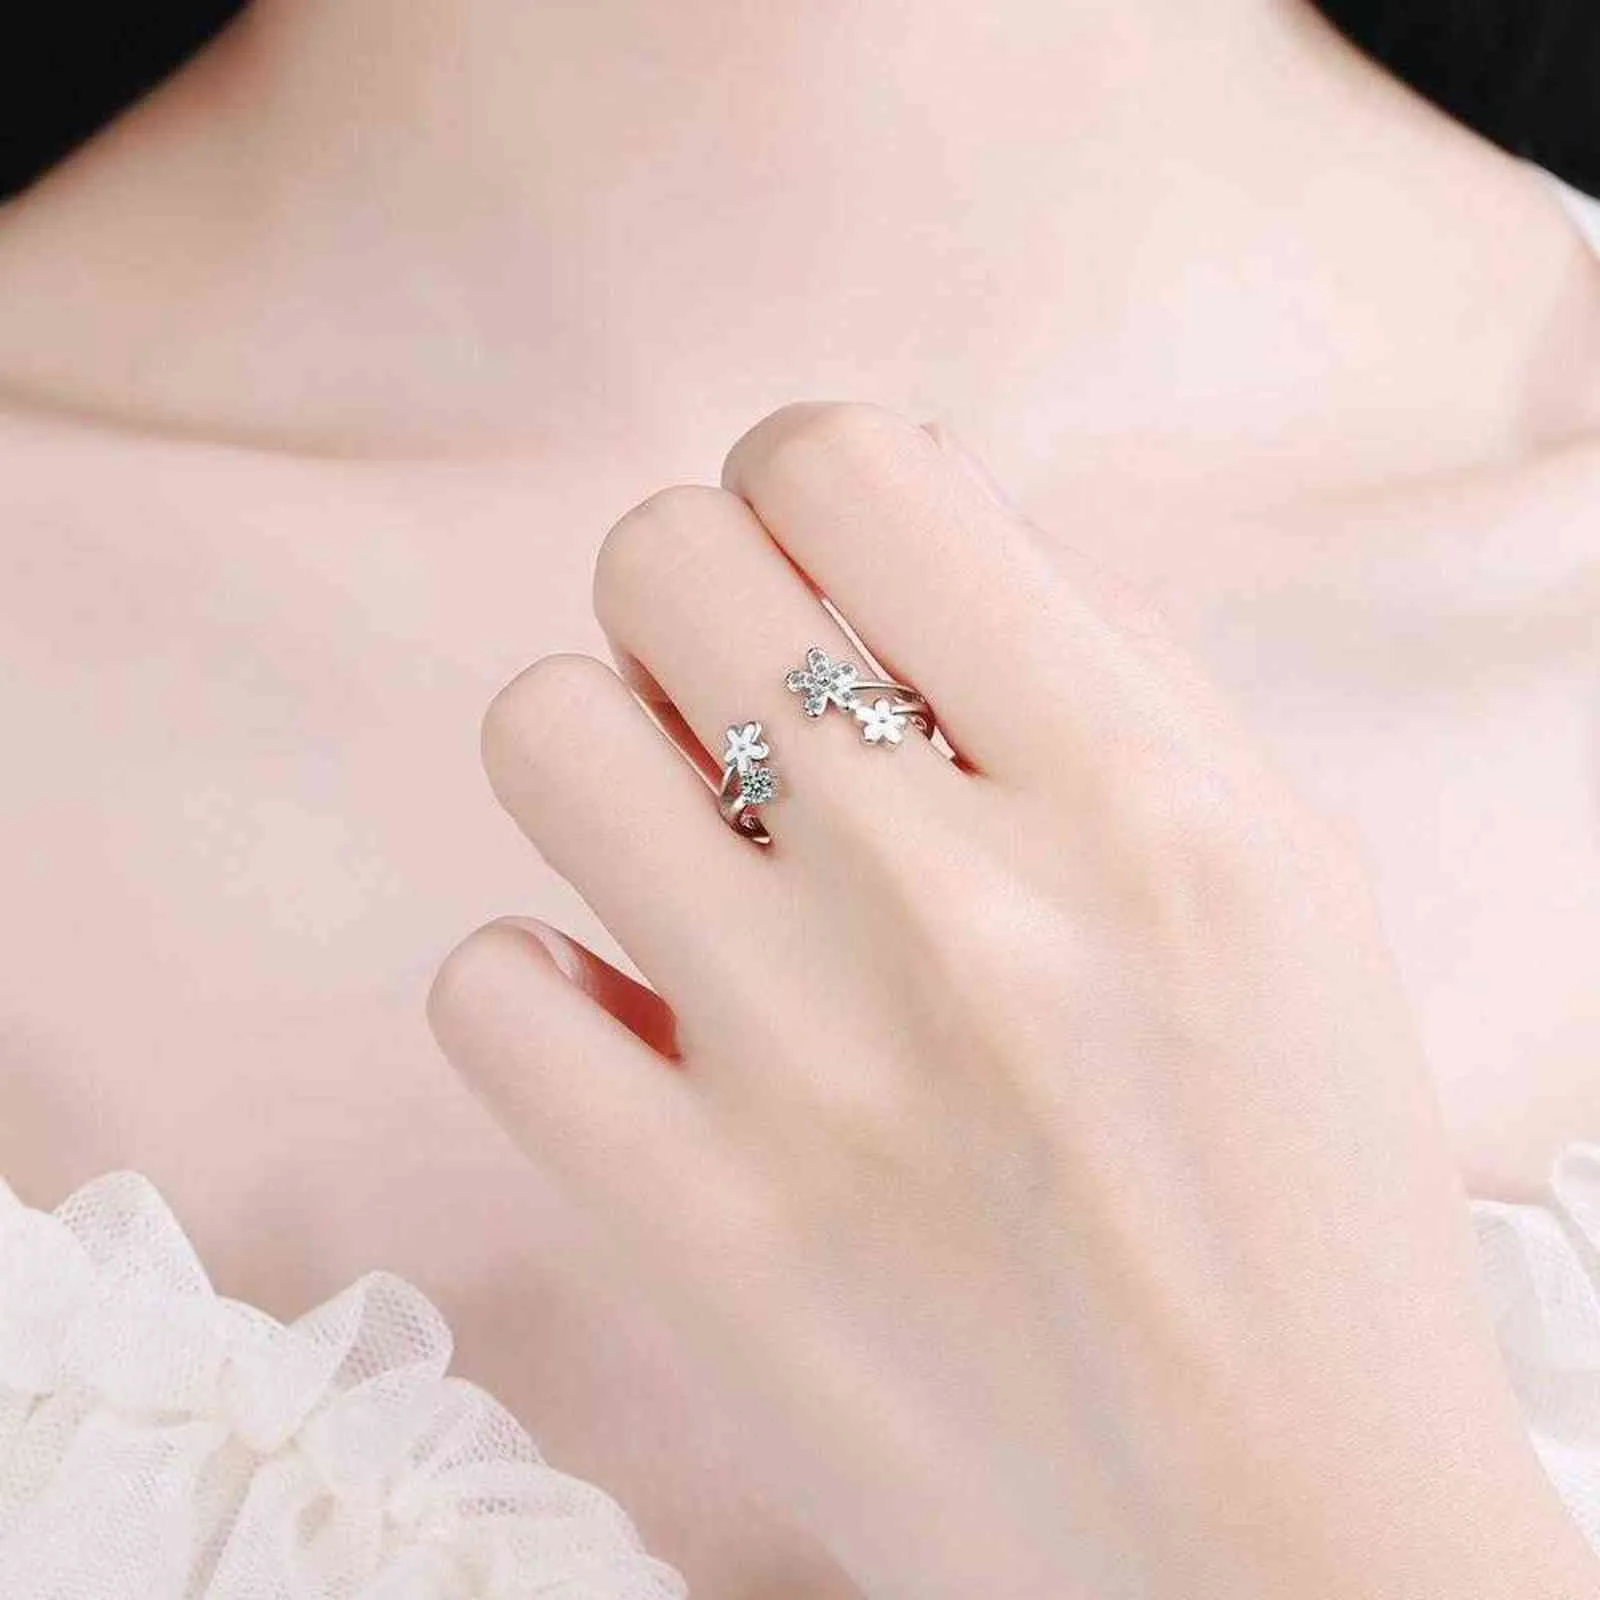 New Trendy Geometric Line Finger Ring for Women Stainless Steel Gold Silver  Color Rings Jewelry Gift Wholesale - AliExpress